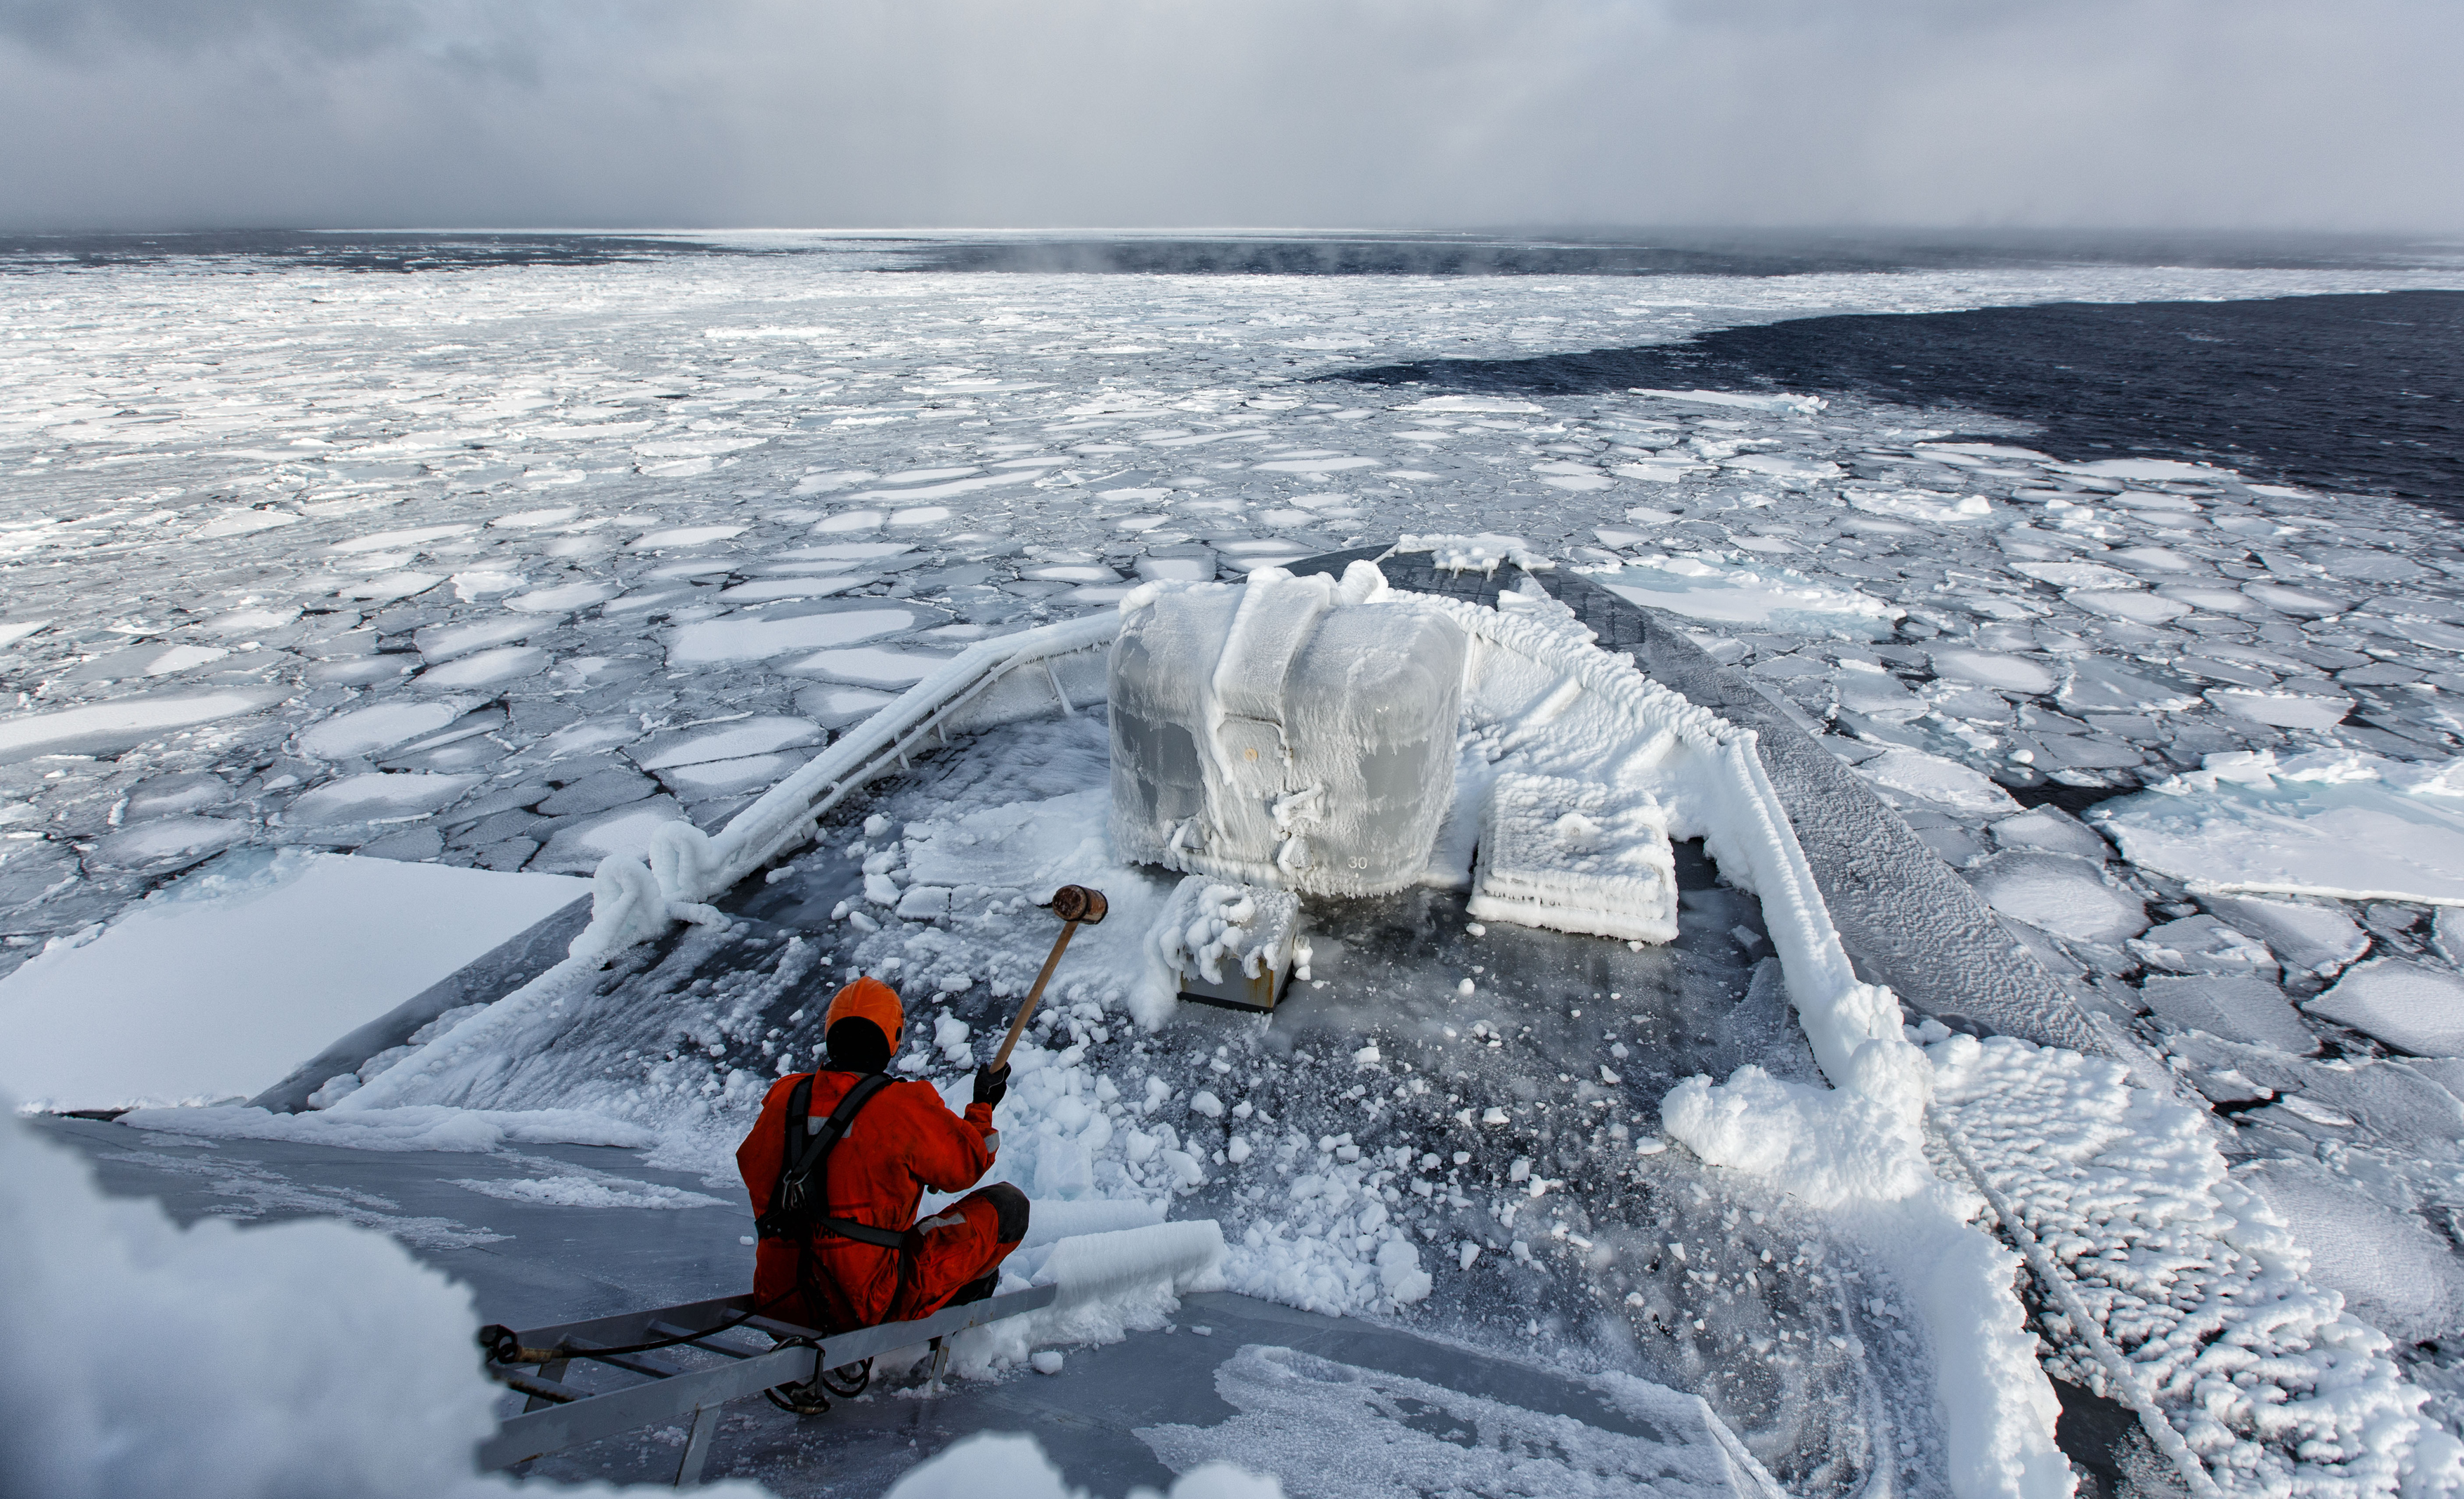 Vessel sailing through ice on the ocean.